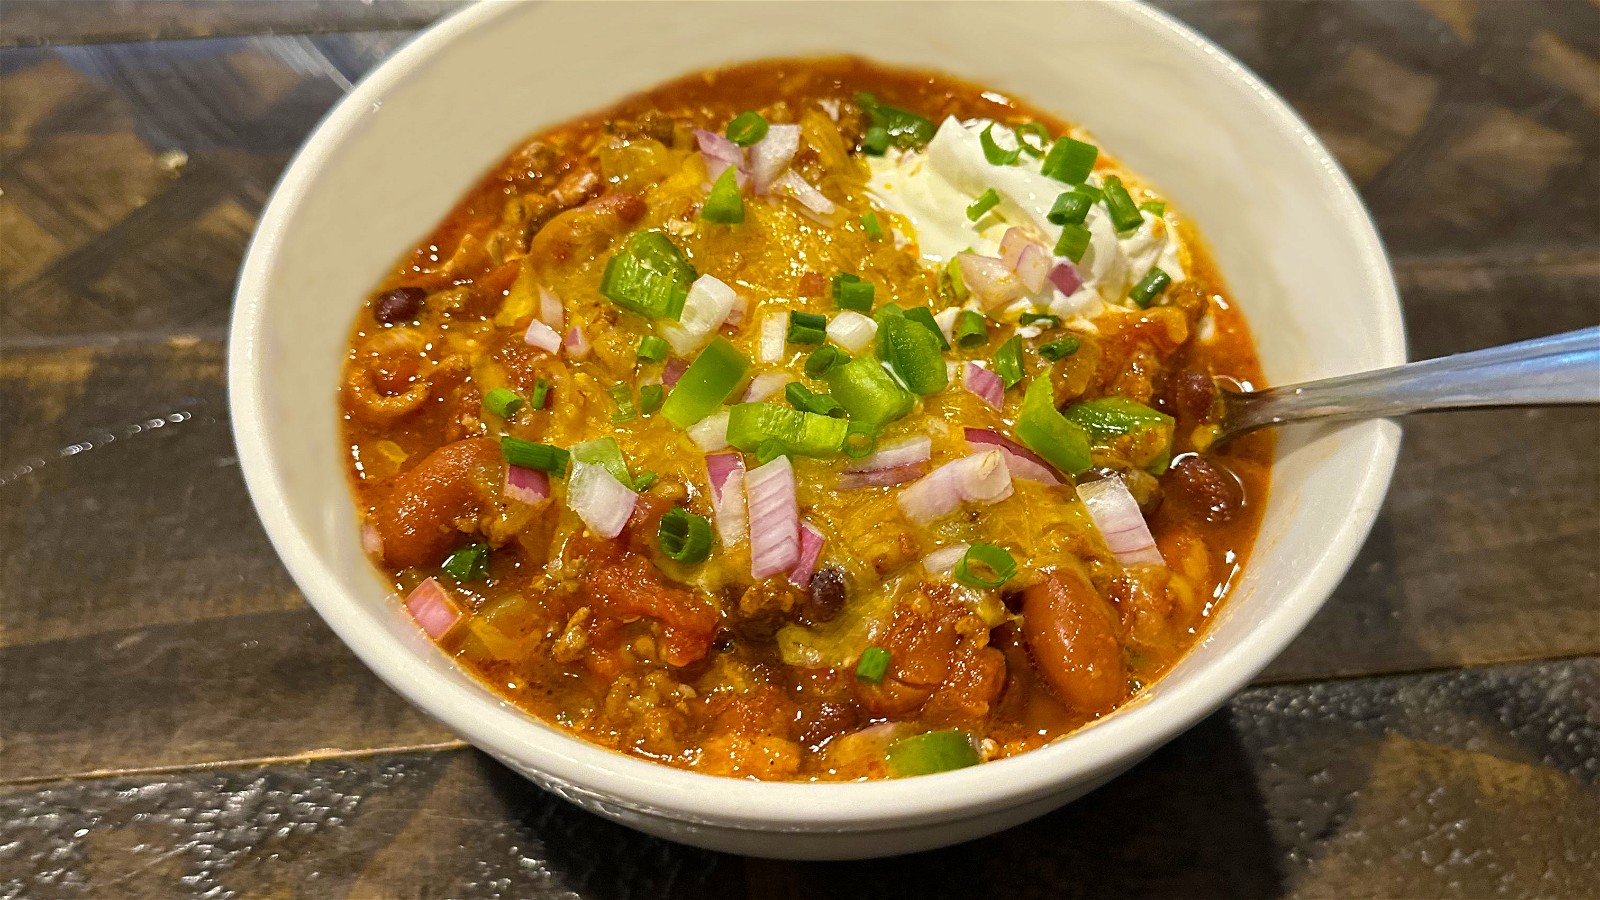 Image of Chili with Beans